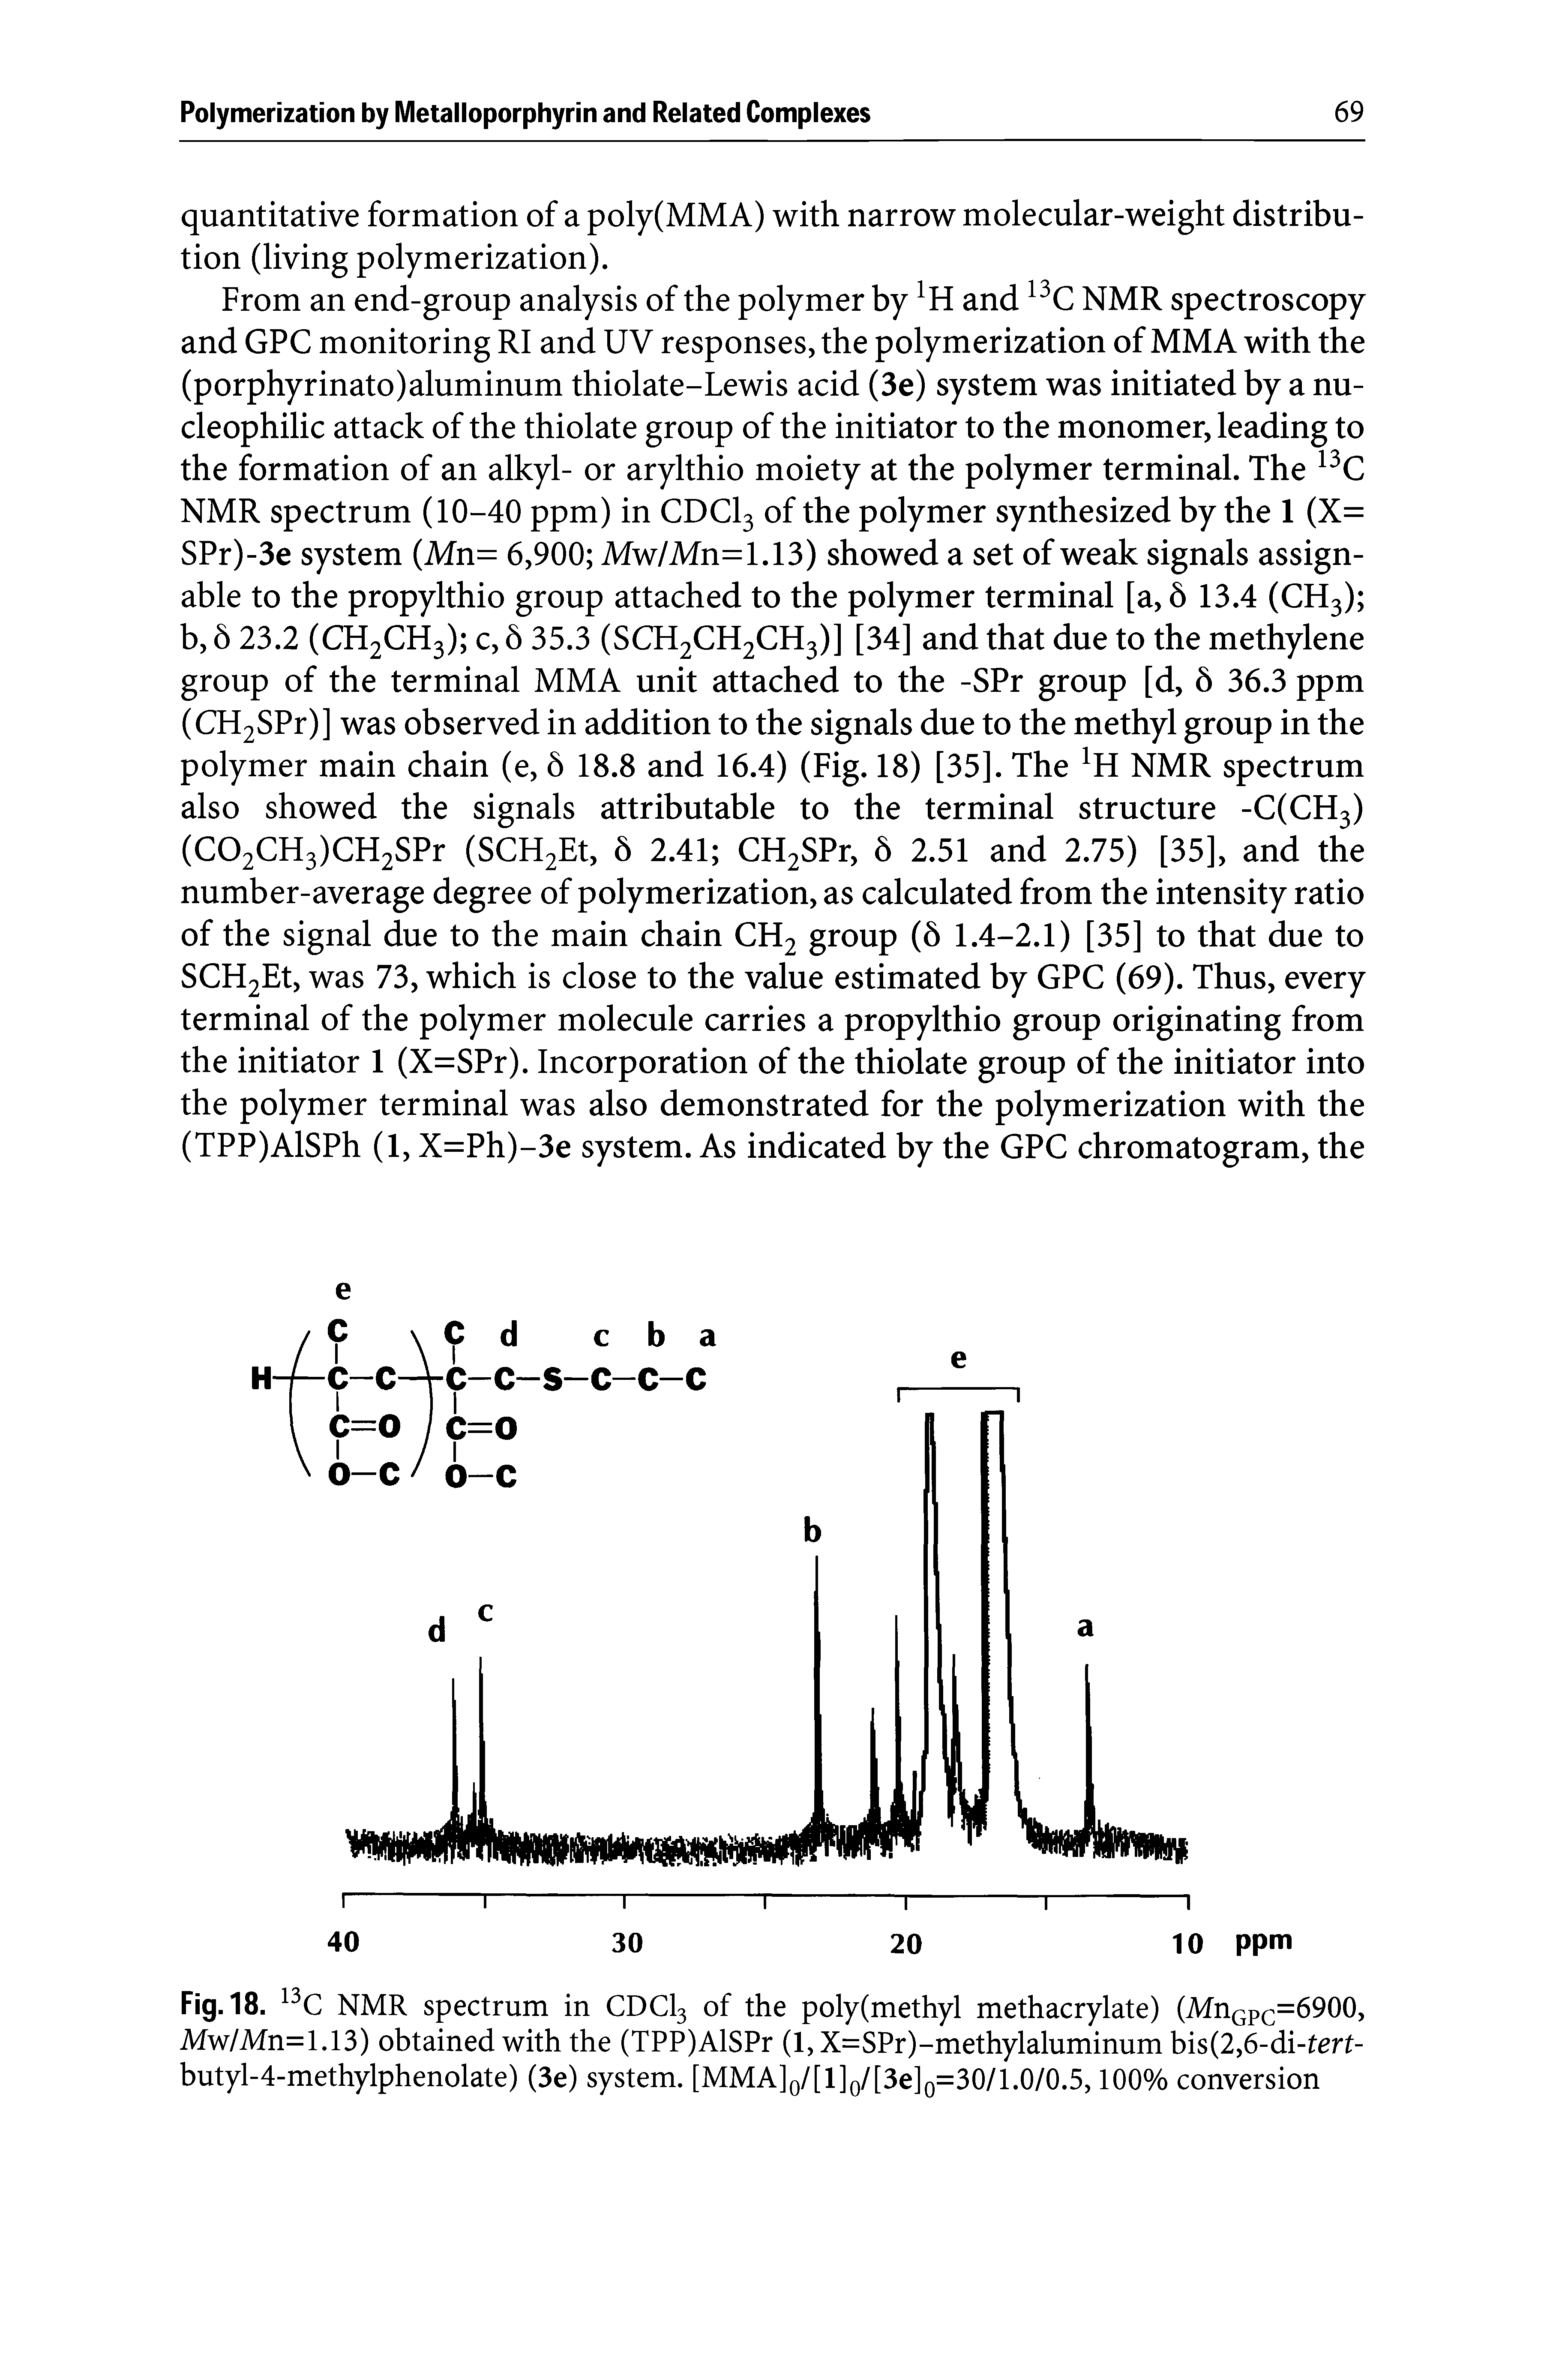 Fig. 18. NMR spectrum in CDCI3 of the poly(methyl methacrylate) (MnGpc=6900, Mw/Mn=1.13) obtained with the (TPP)AlSPr (1, X=SPr)-methylaluminum bis(2,6-di-tert-butyl-4-methylphenolate) (3e) system. [MMA]o/[l]o/[3e]o=30/1.0/0.5,100% conversion...